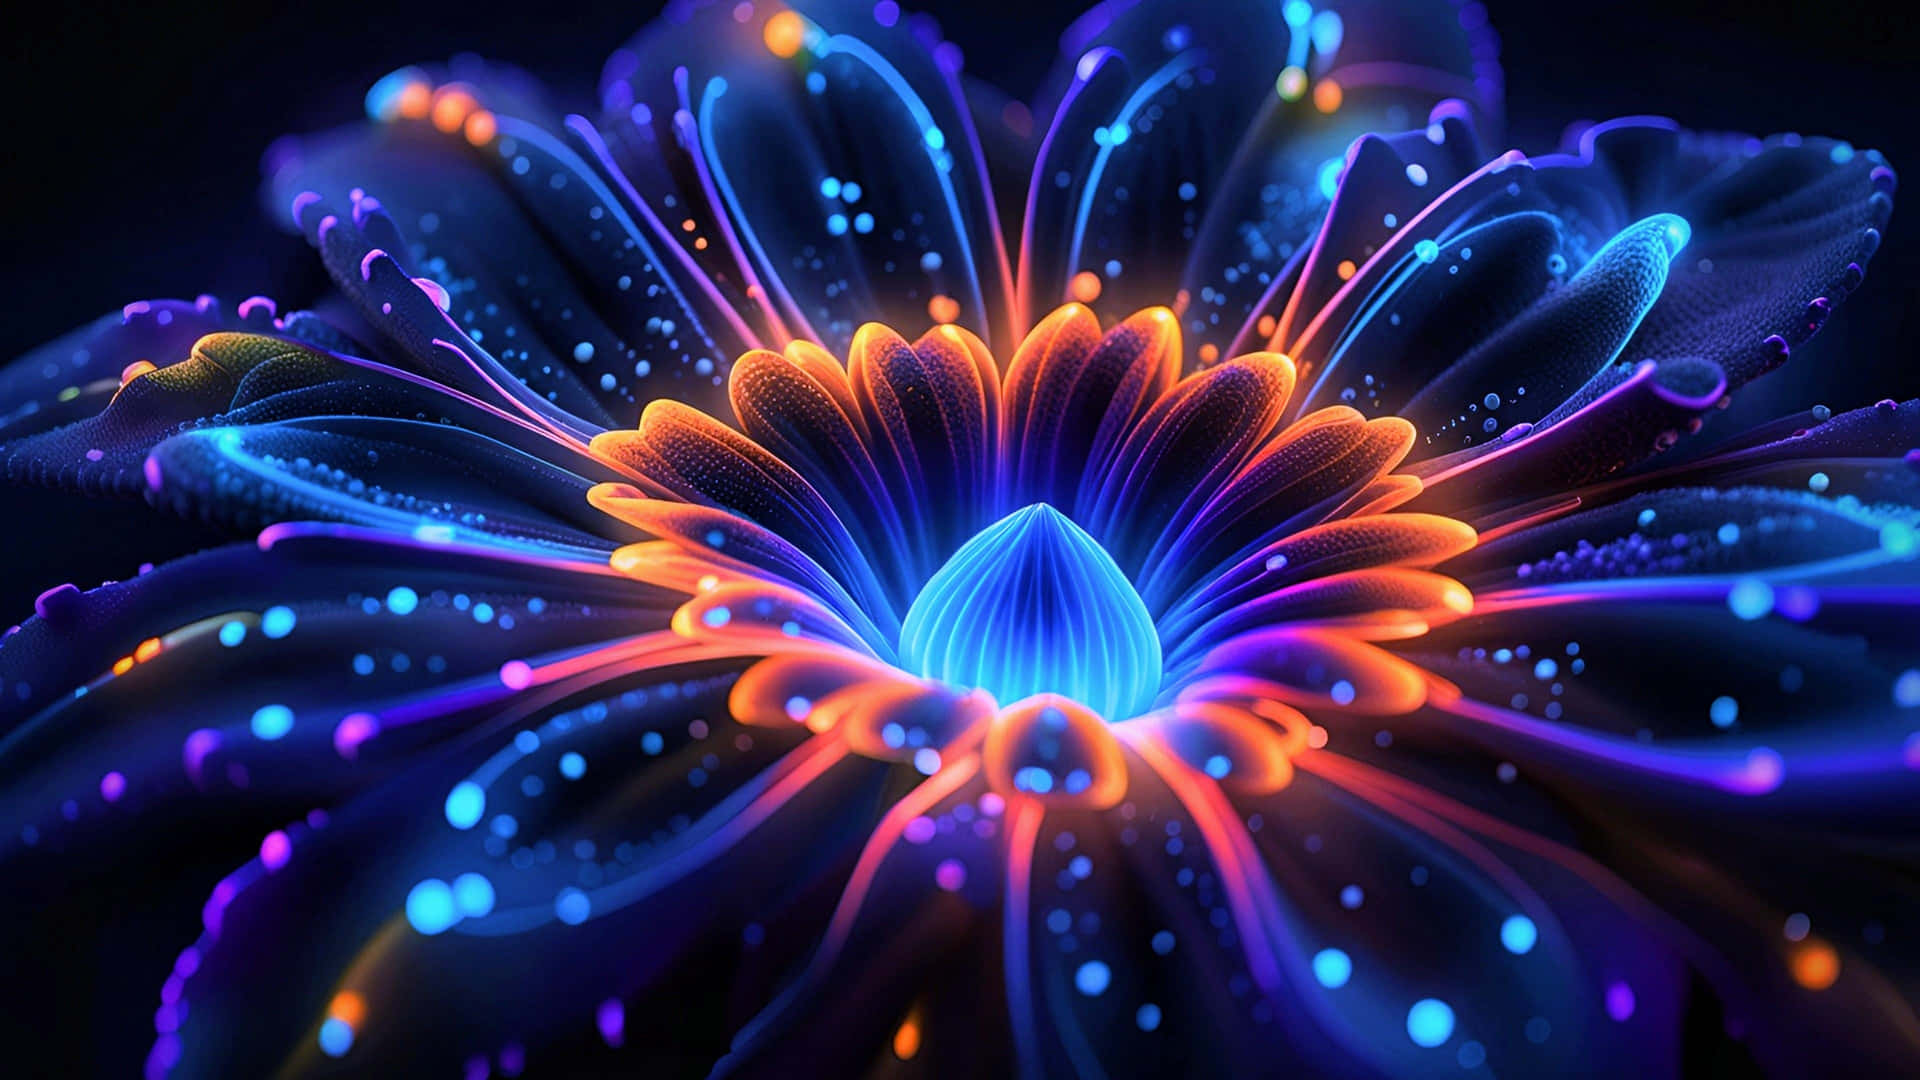 Neon Floral Abstract Artwork Wallpaper